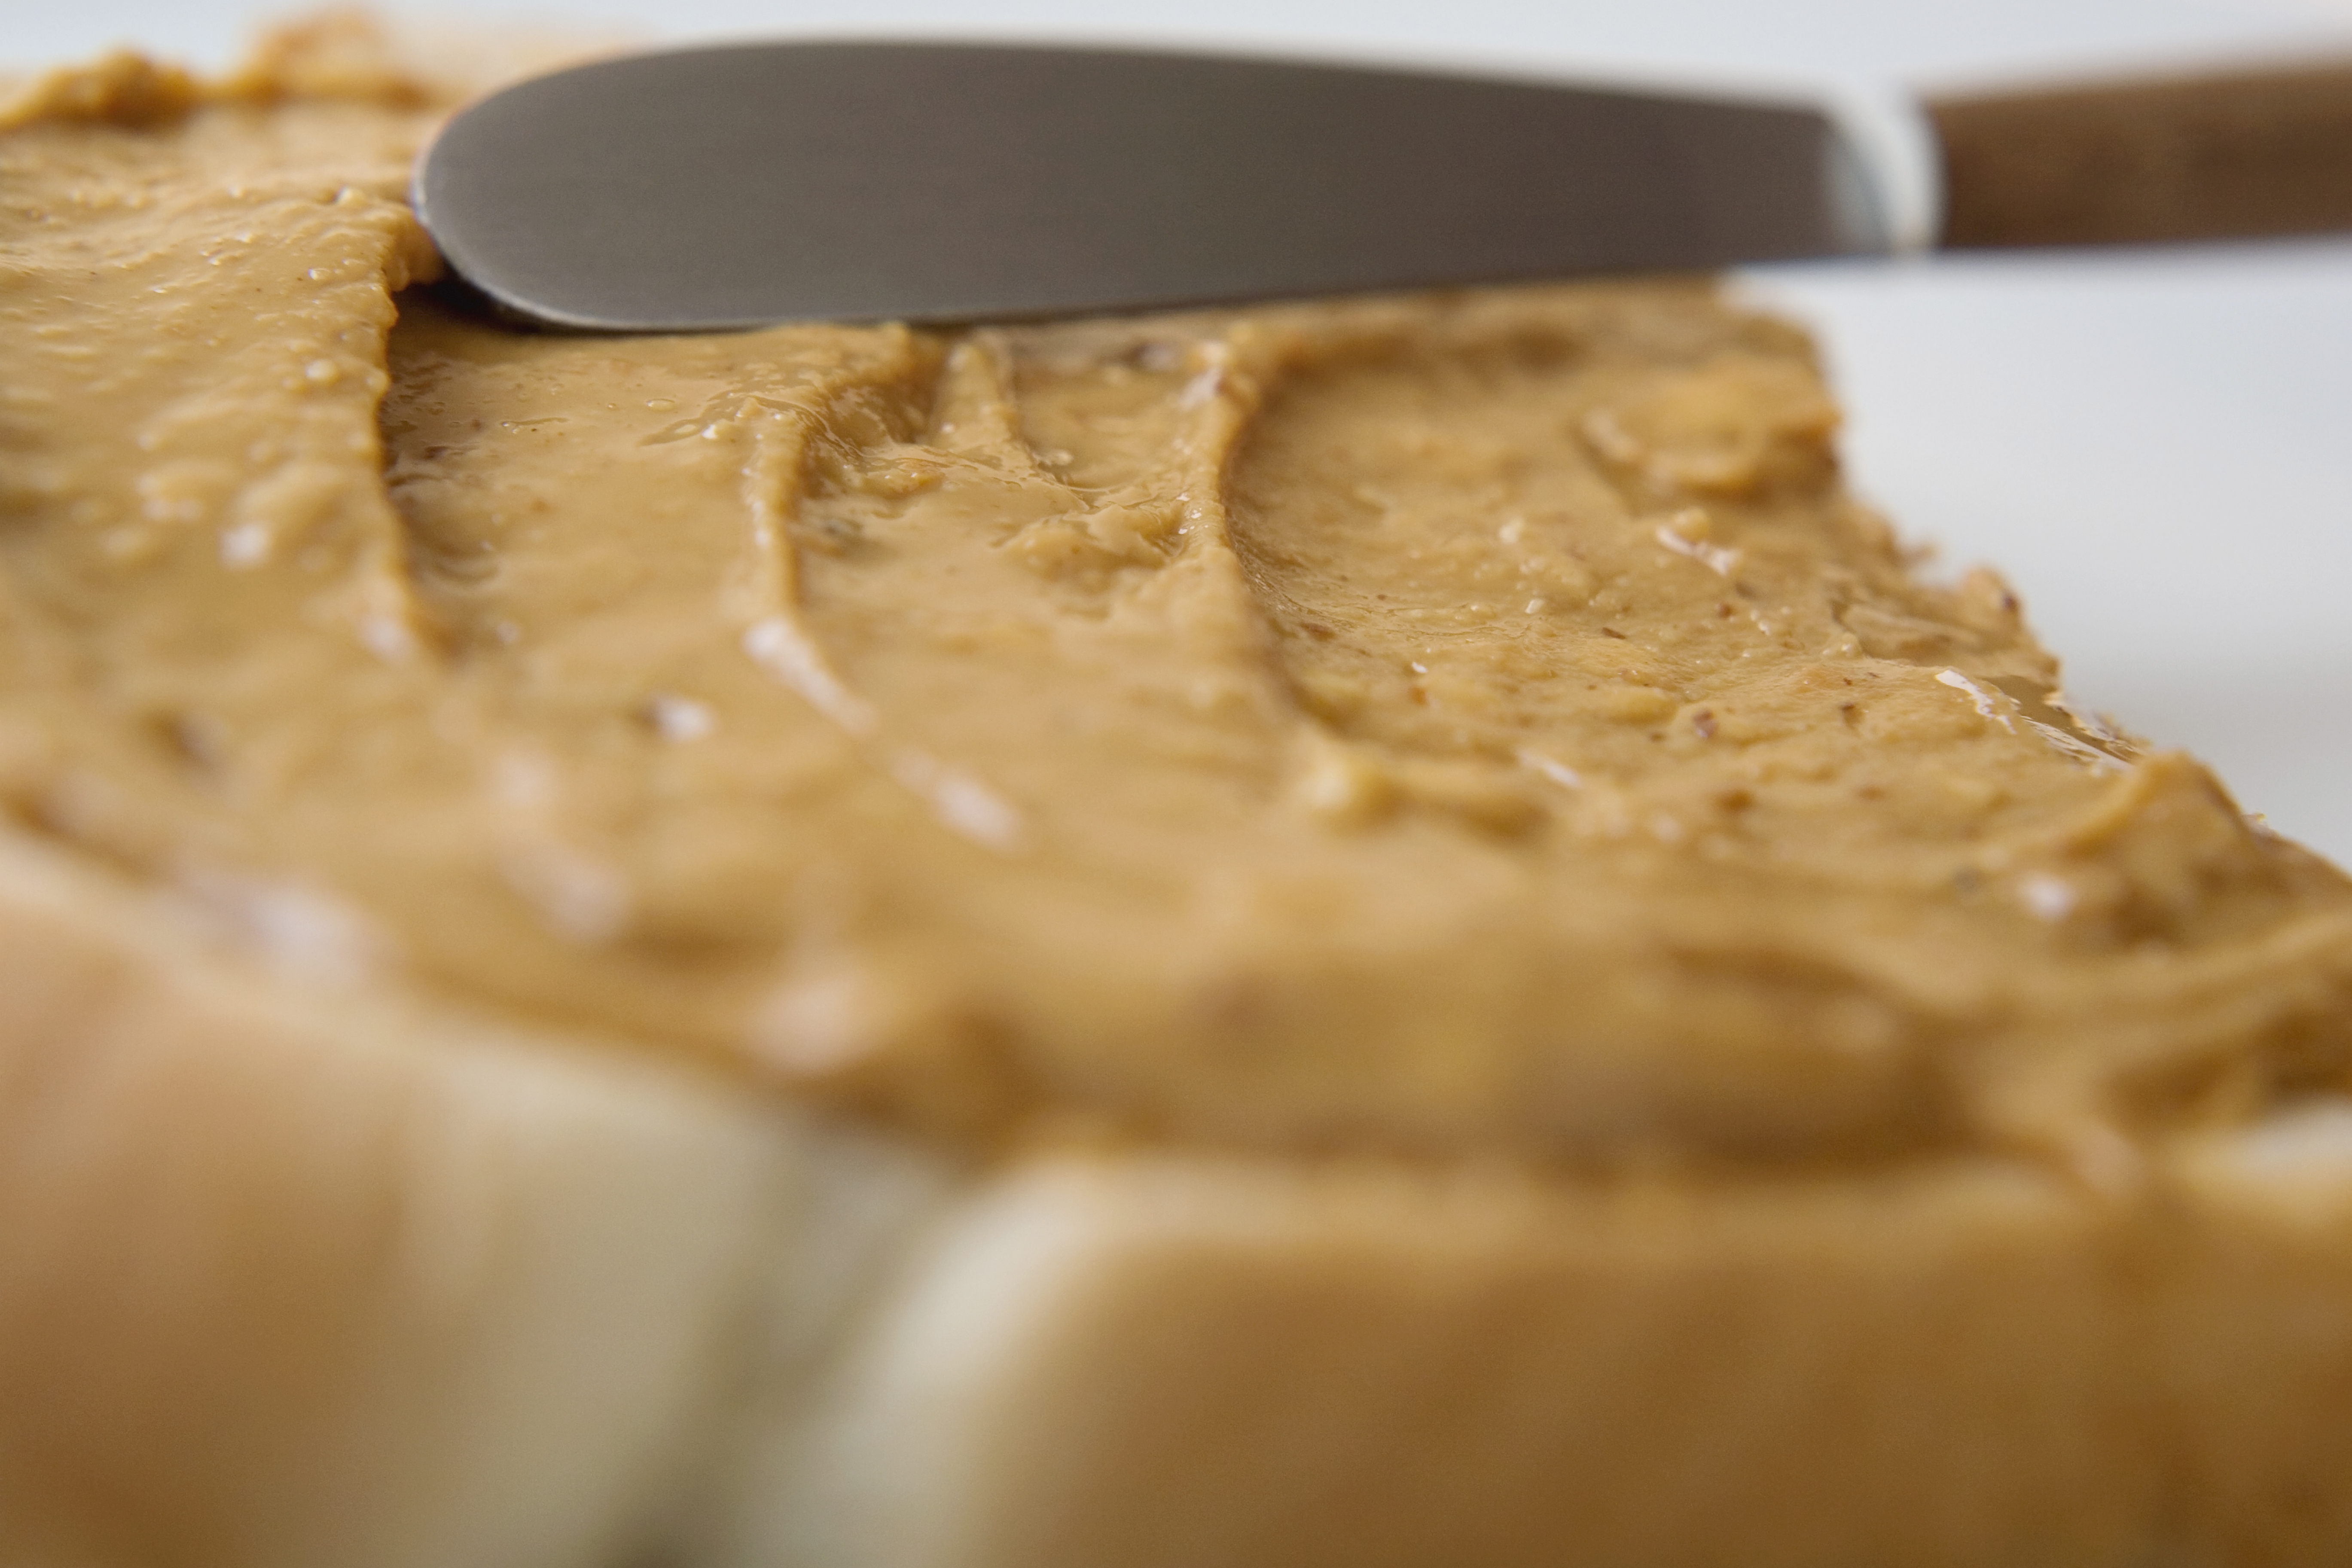 Food Blogger Reveals THIS Is The BEST Peanut Butter Brand